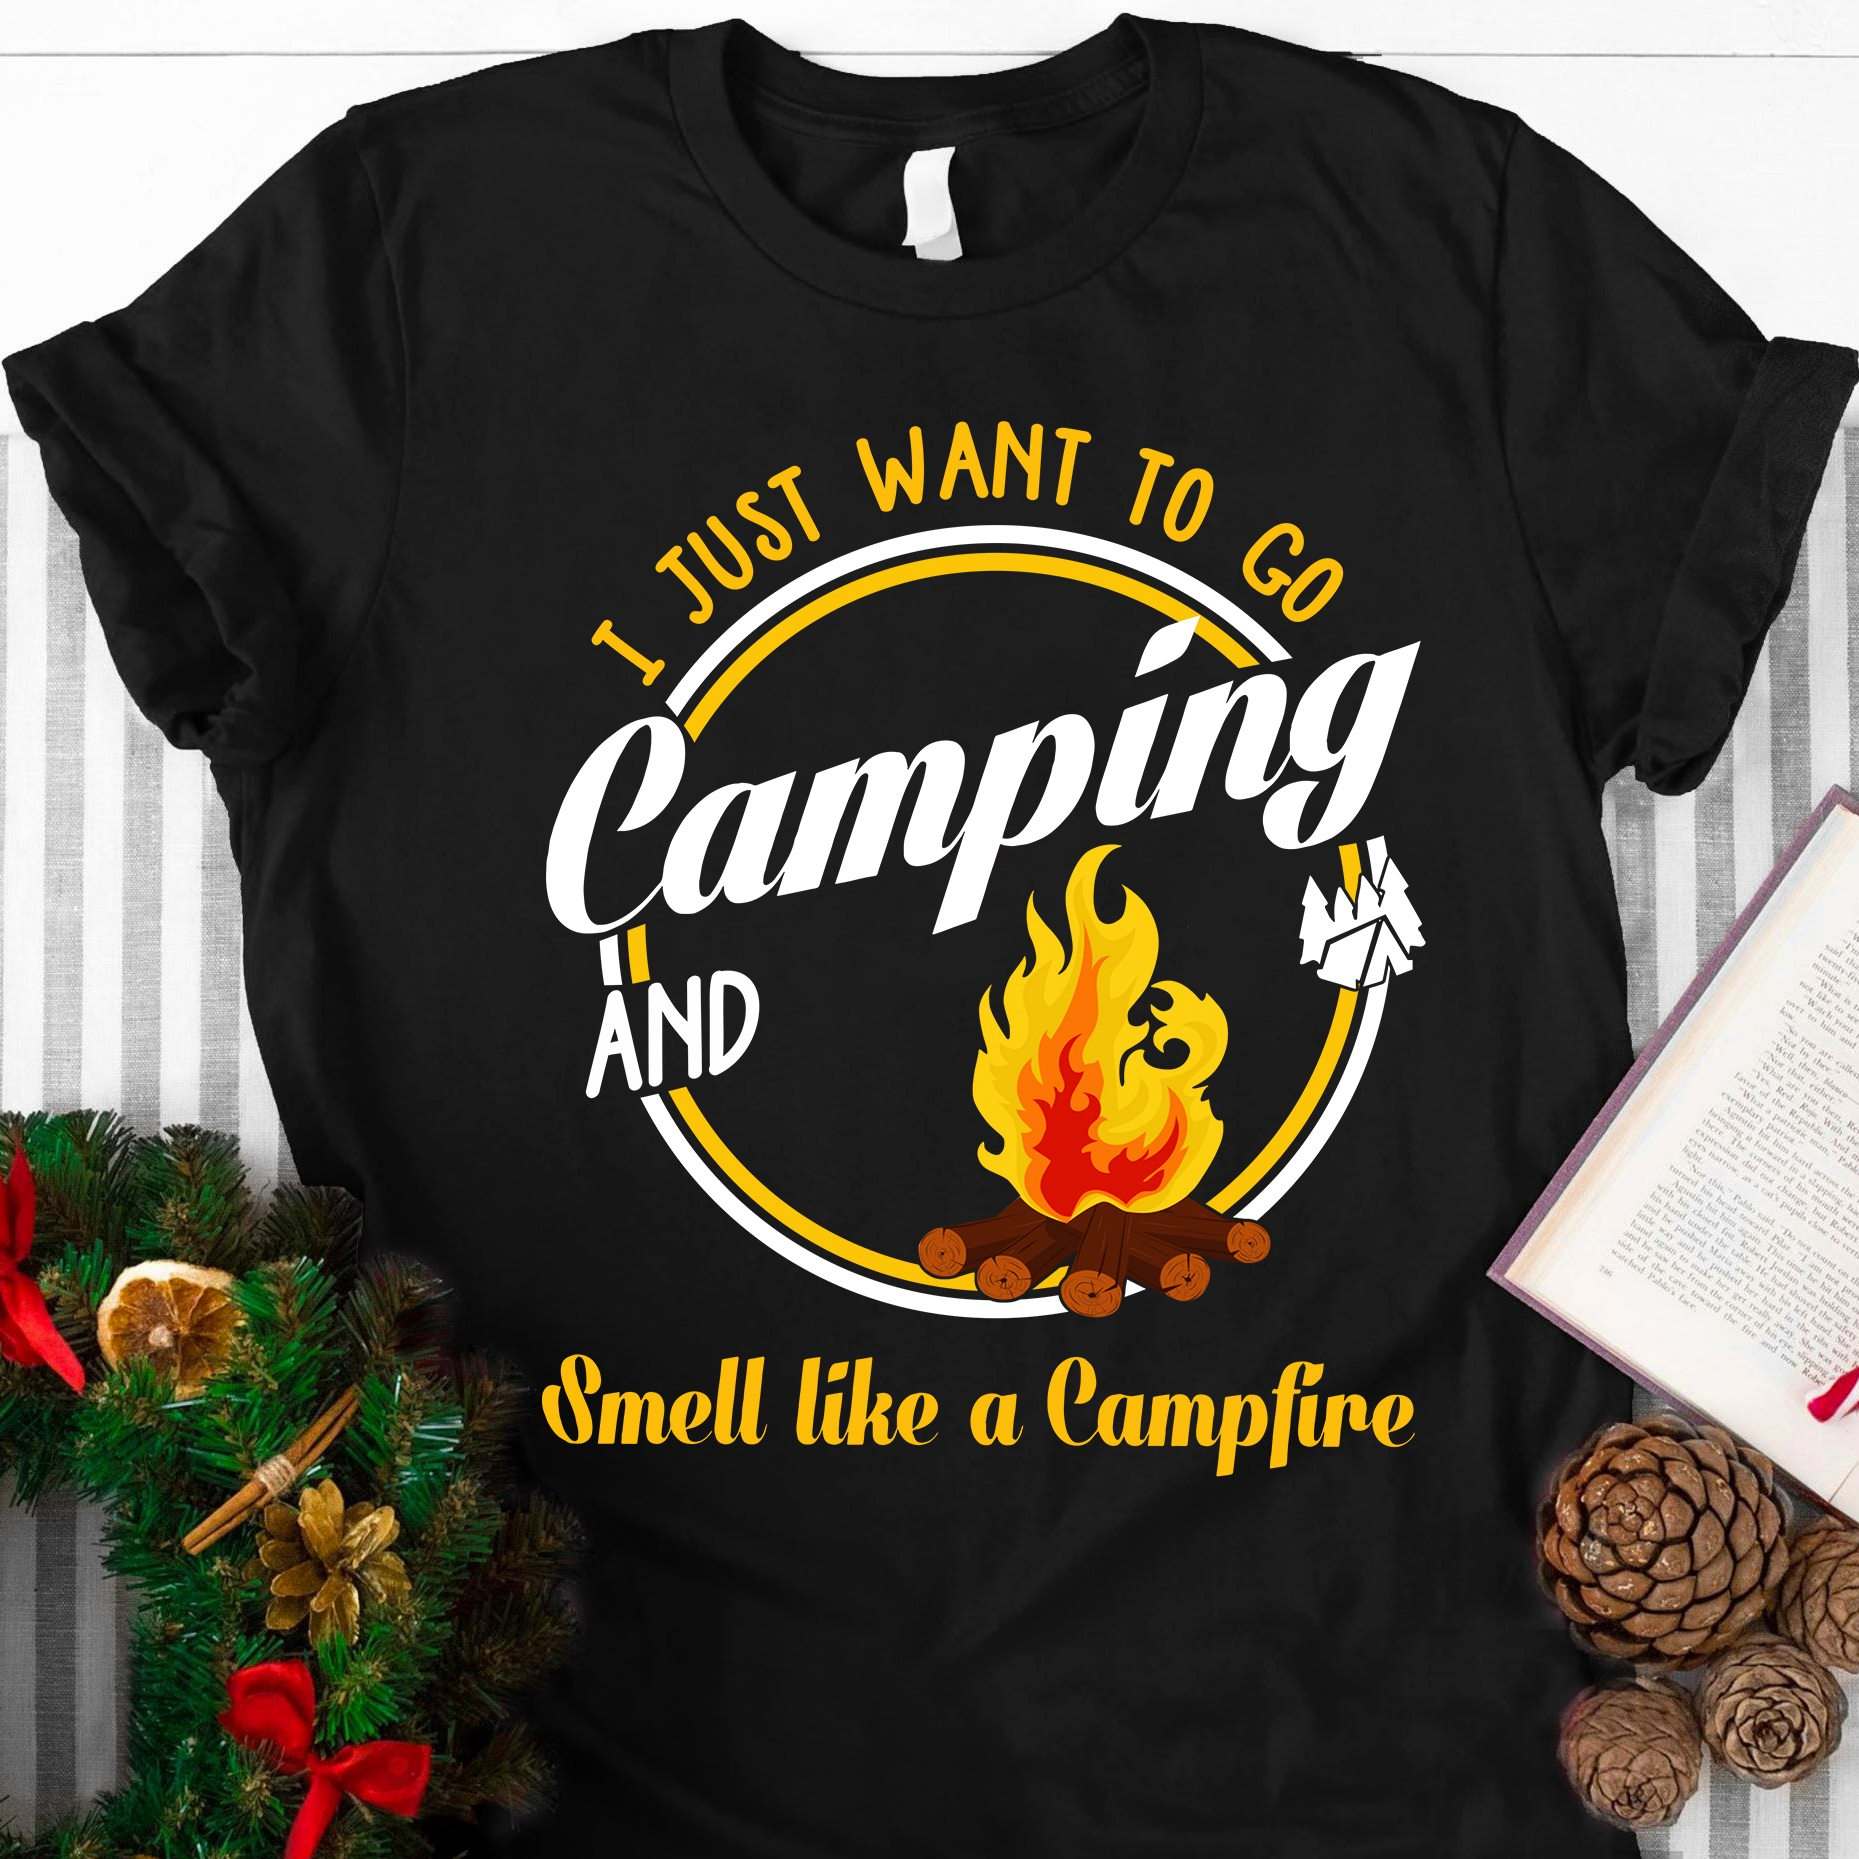 I just want to go camping and smell like a campfire - Love camping T-shirt